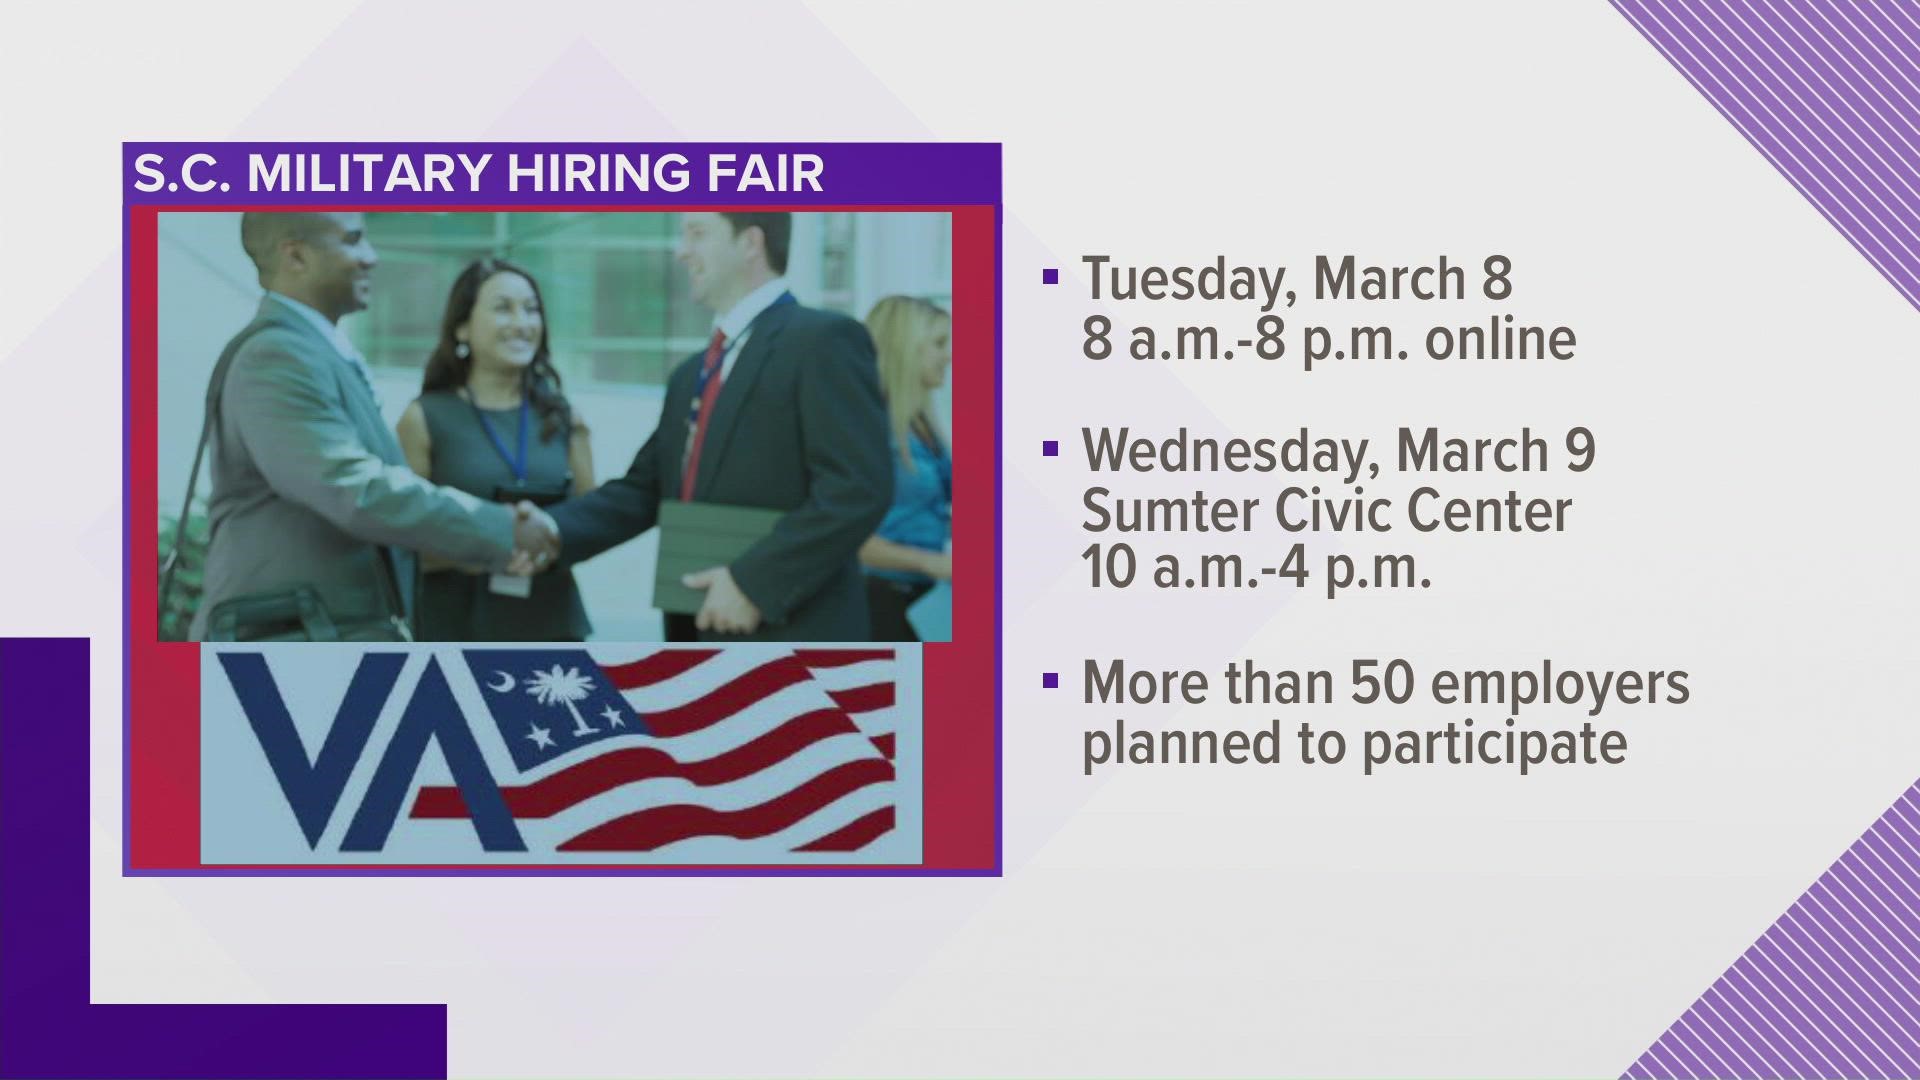 The fair will be a virtual and in-person, two-day event starting on March 8, from 8 a.m. to 8 p.m.